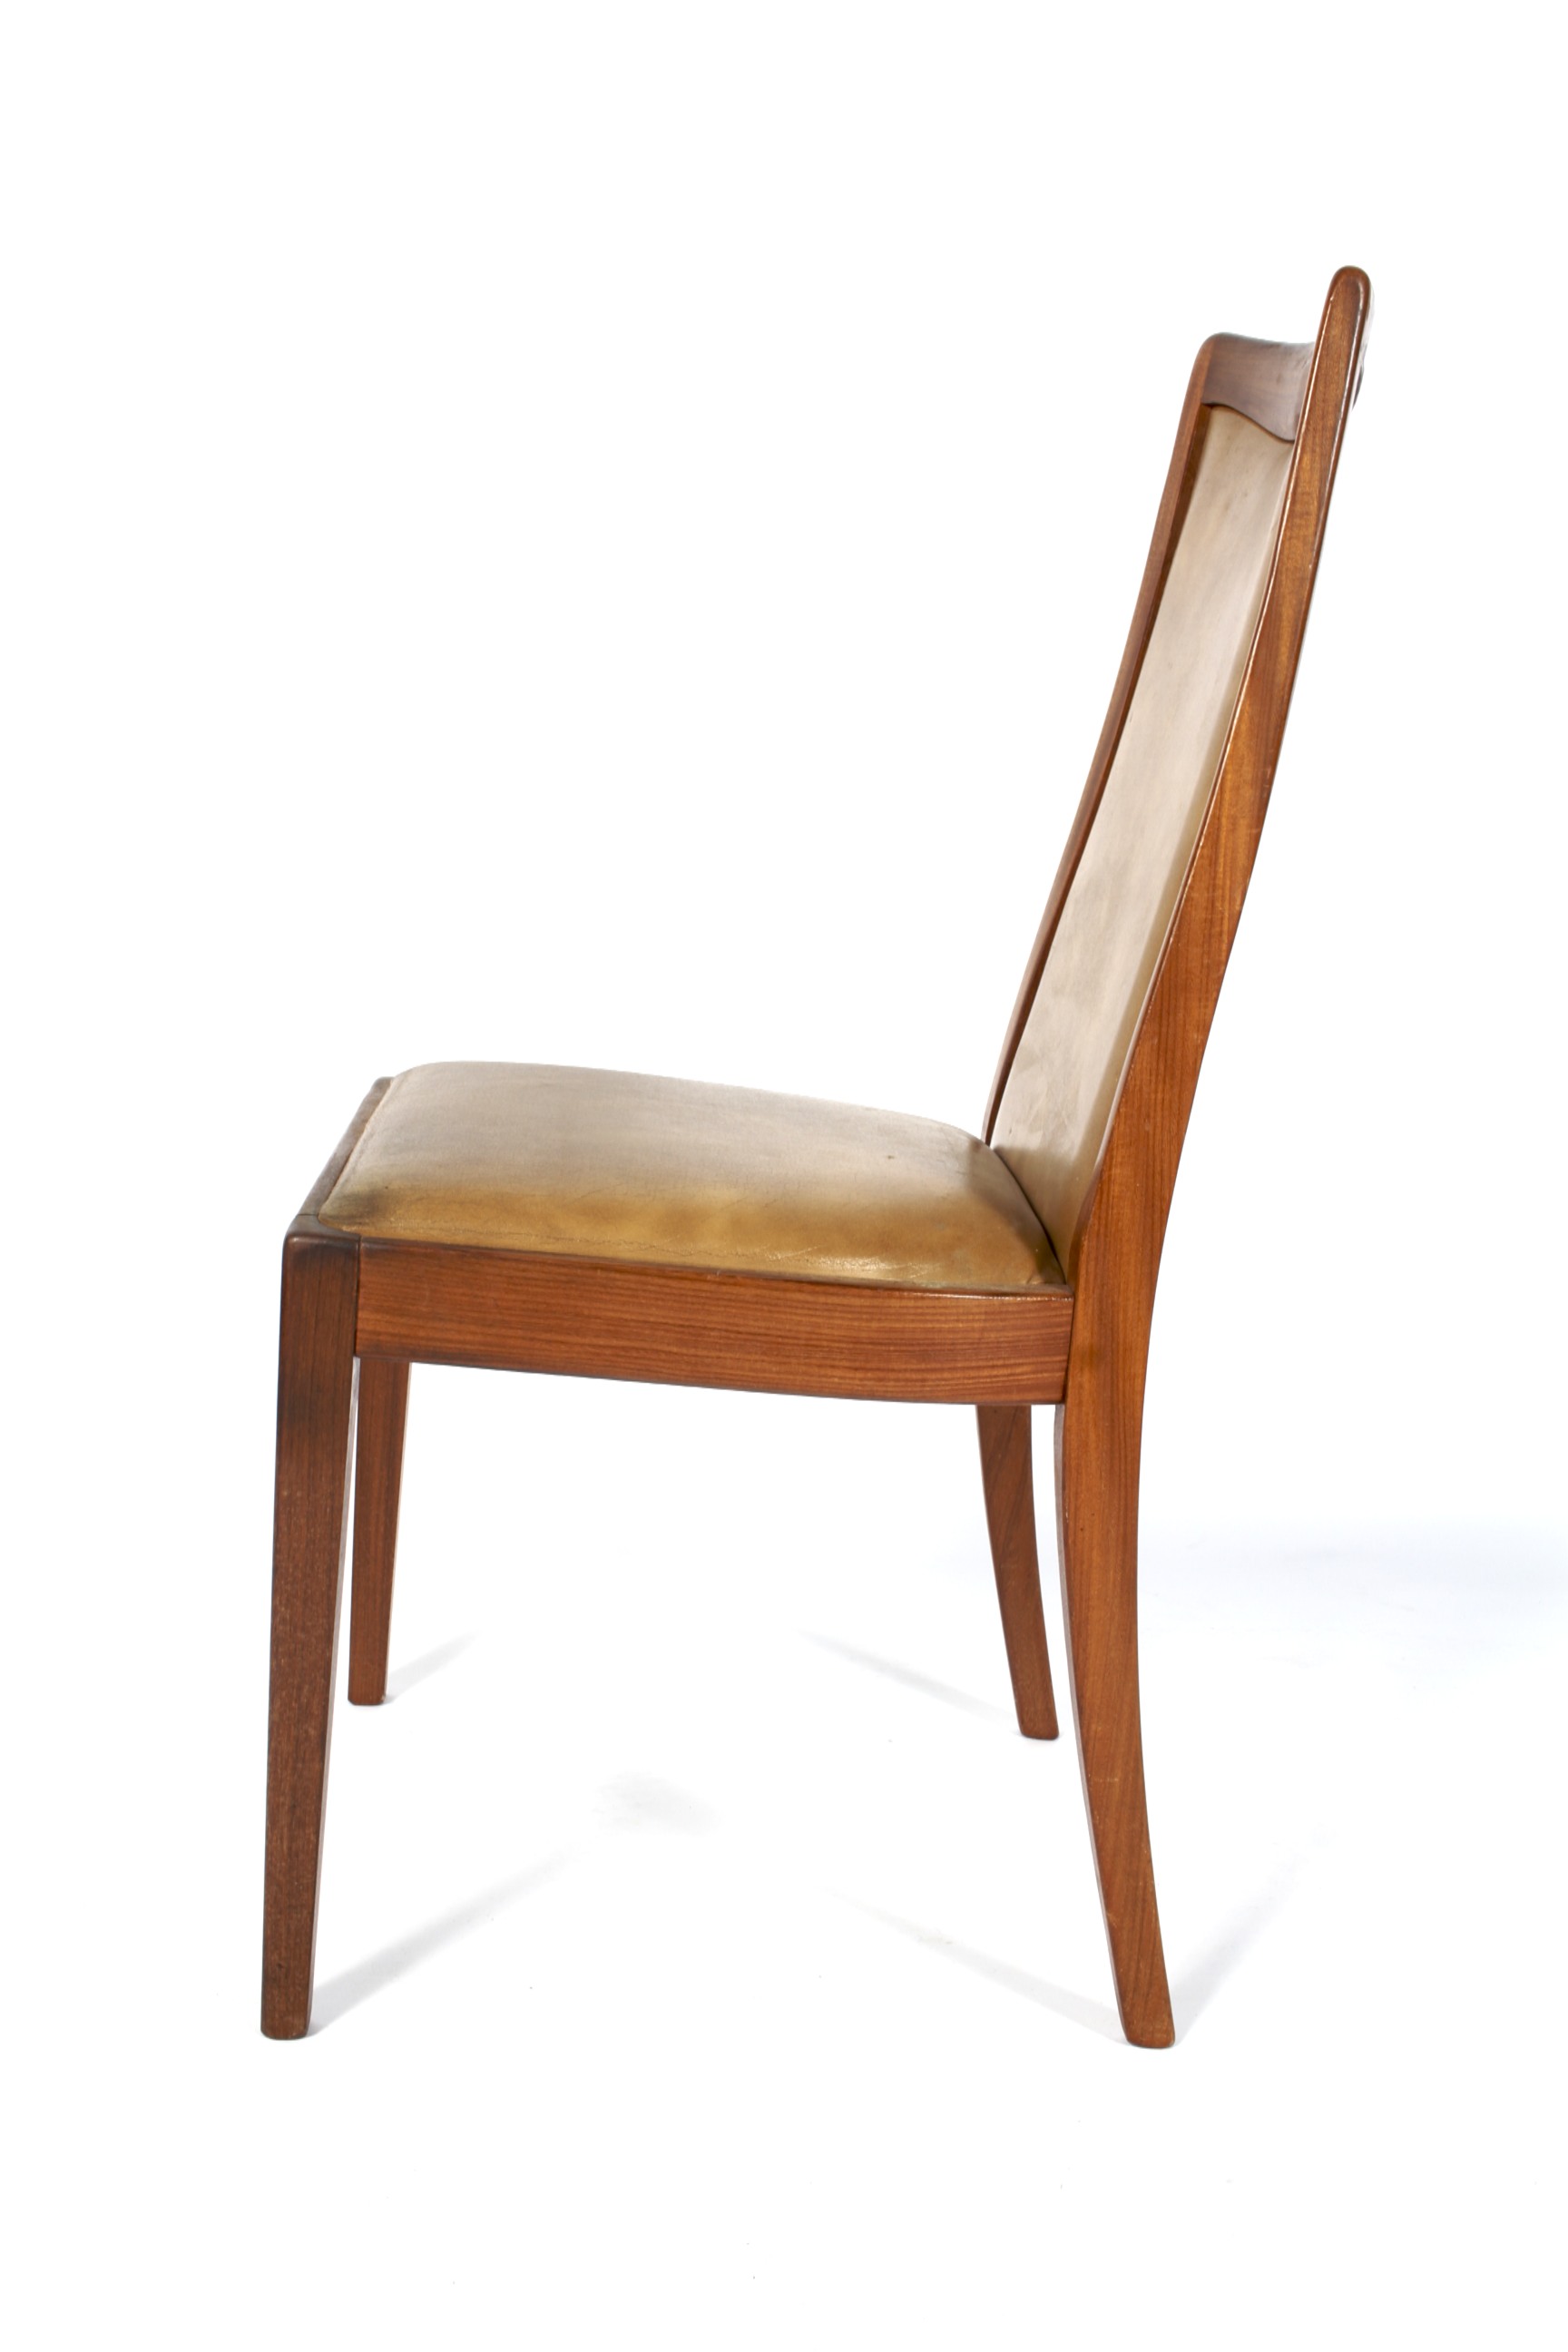 A 1960s G-Plan teak framed chair. With h - Image 2 of 2